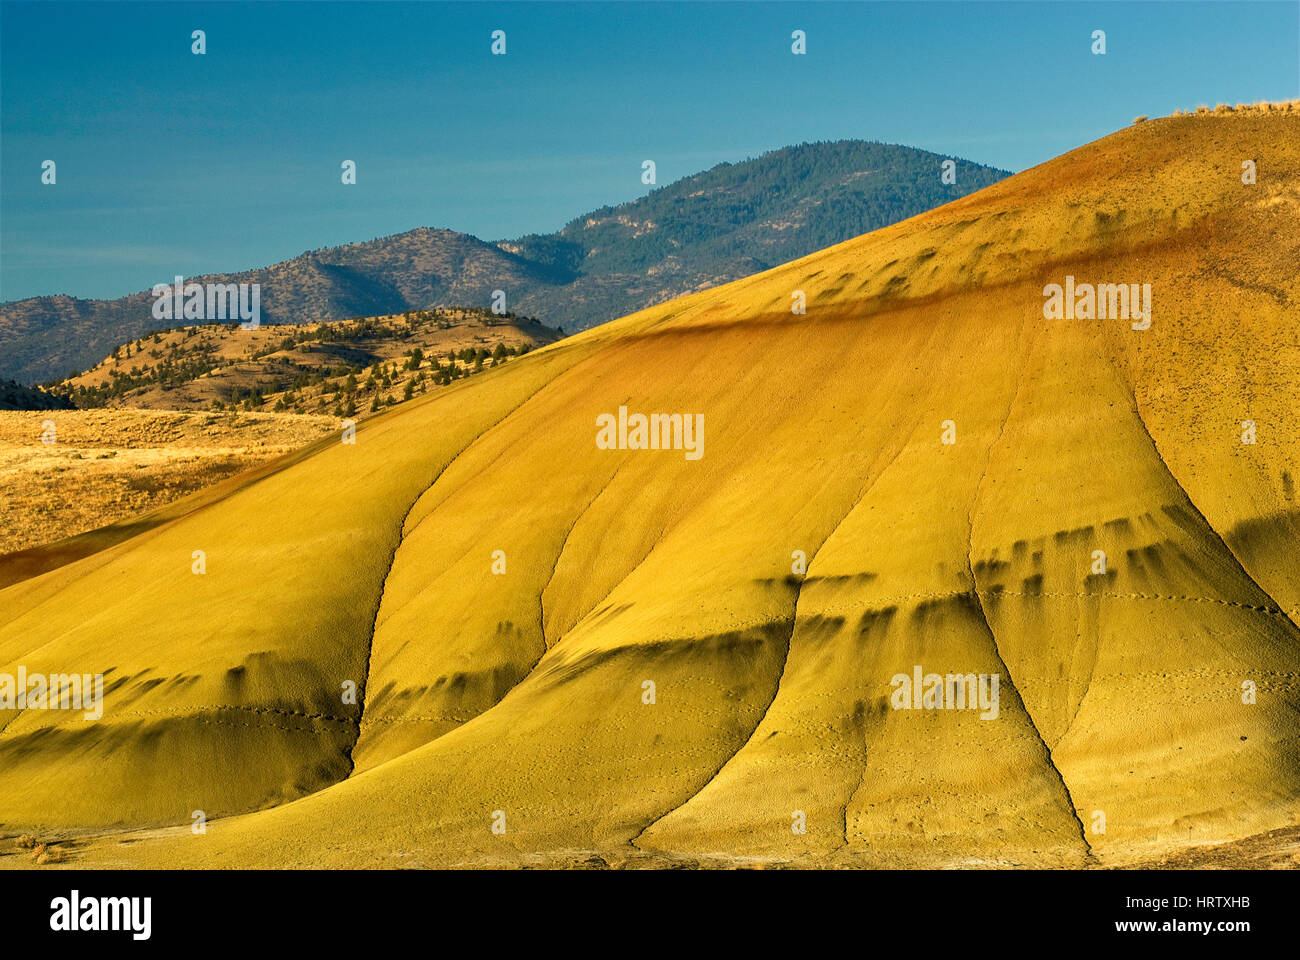 Painted Hills at John Day Fossil Beds National Monument, Painted Hills Unit, Oregon, USA Stock Photo